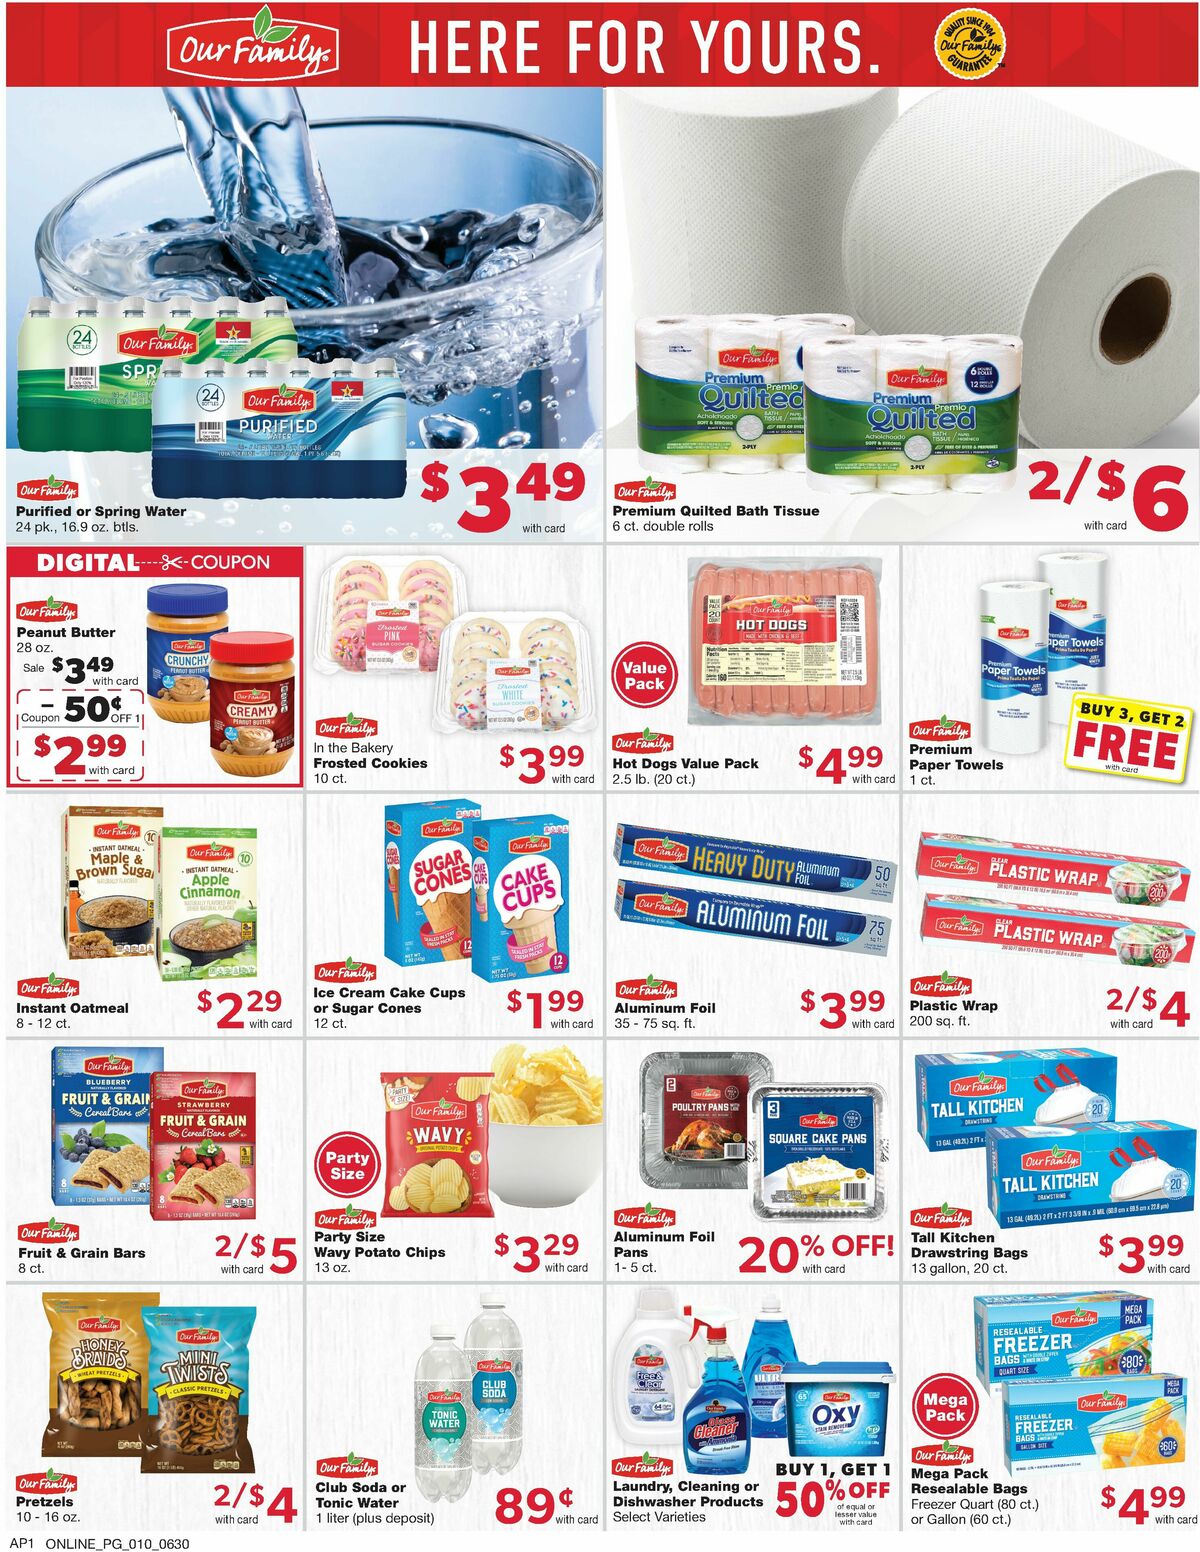 Family Fare Weekly Ad from June 30